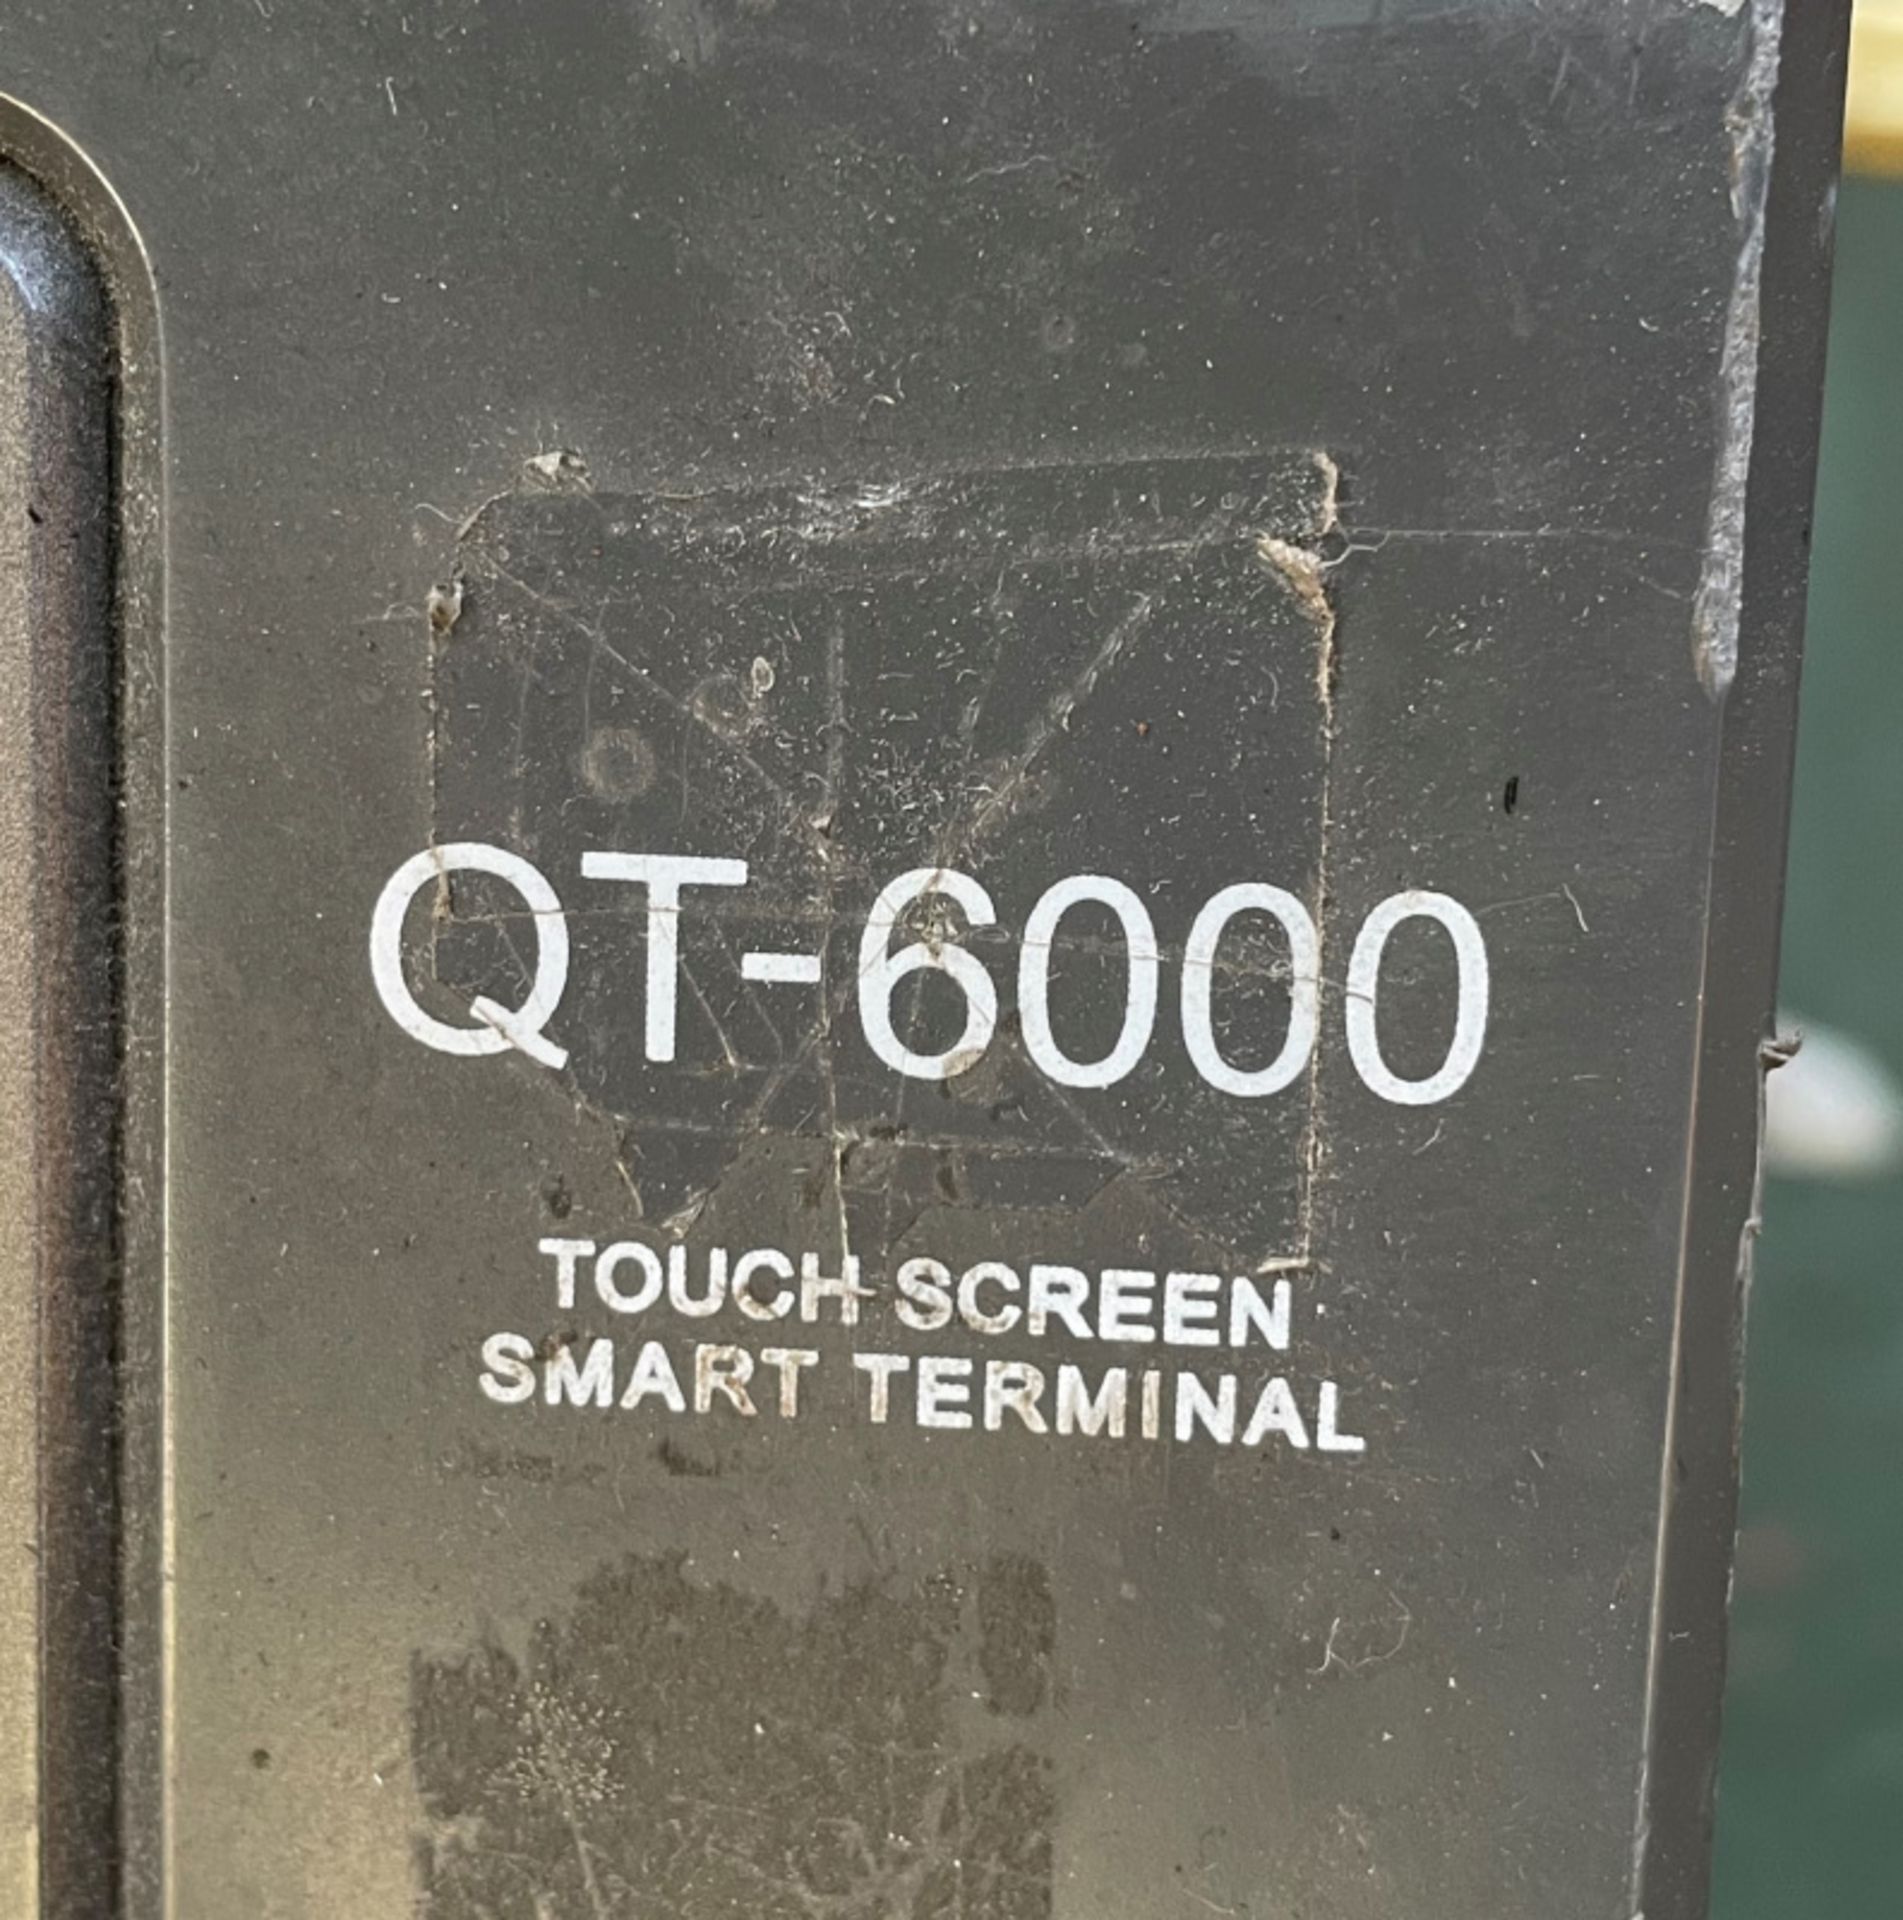 Casio QT-600 Touch Screen Smart Terminal - Image 2 of 2